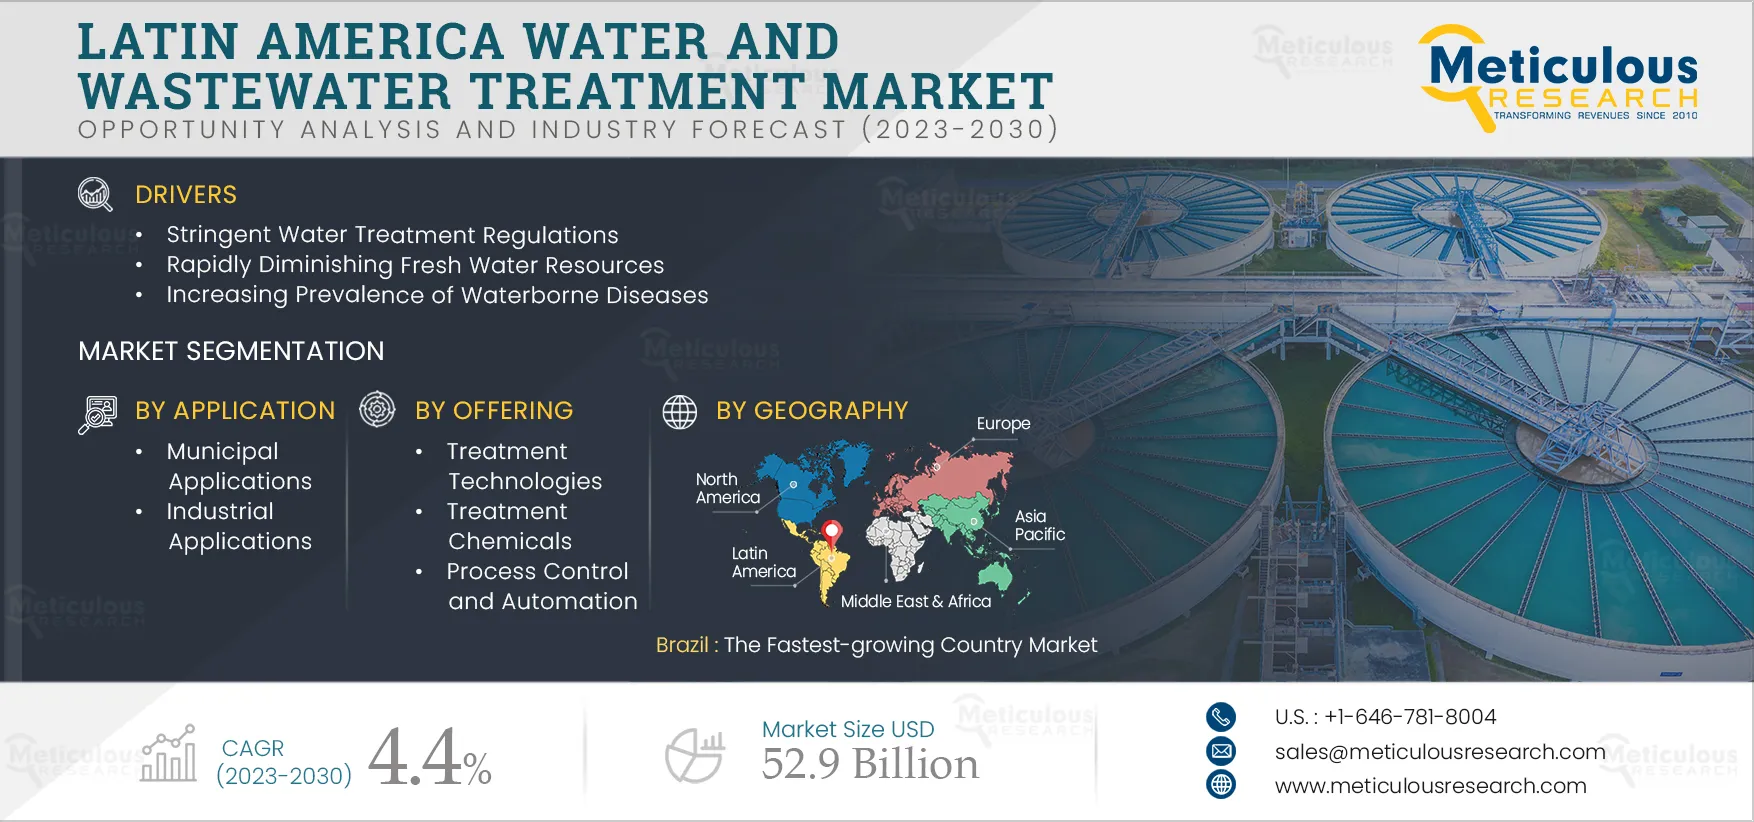  Latin America Water and Wastewater Treatment Market